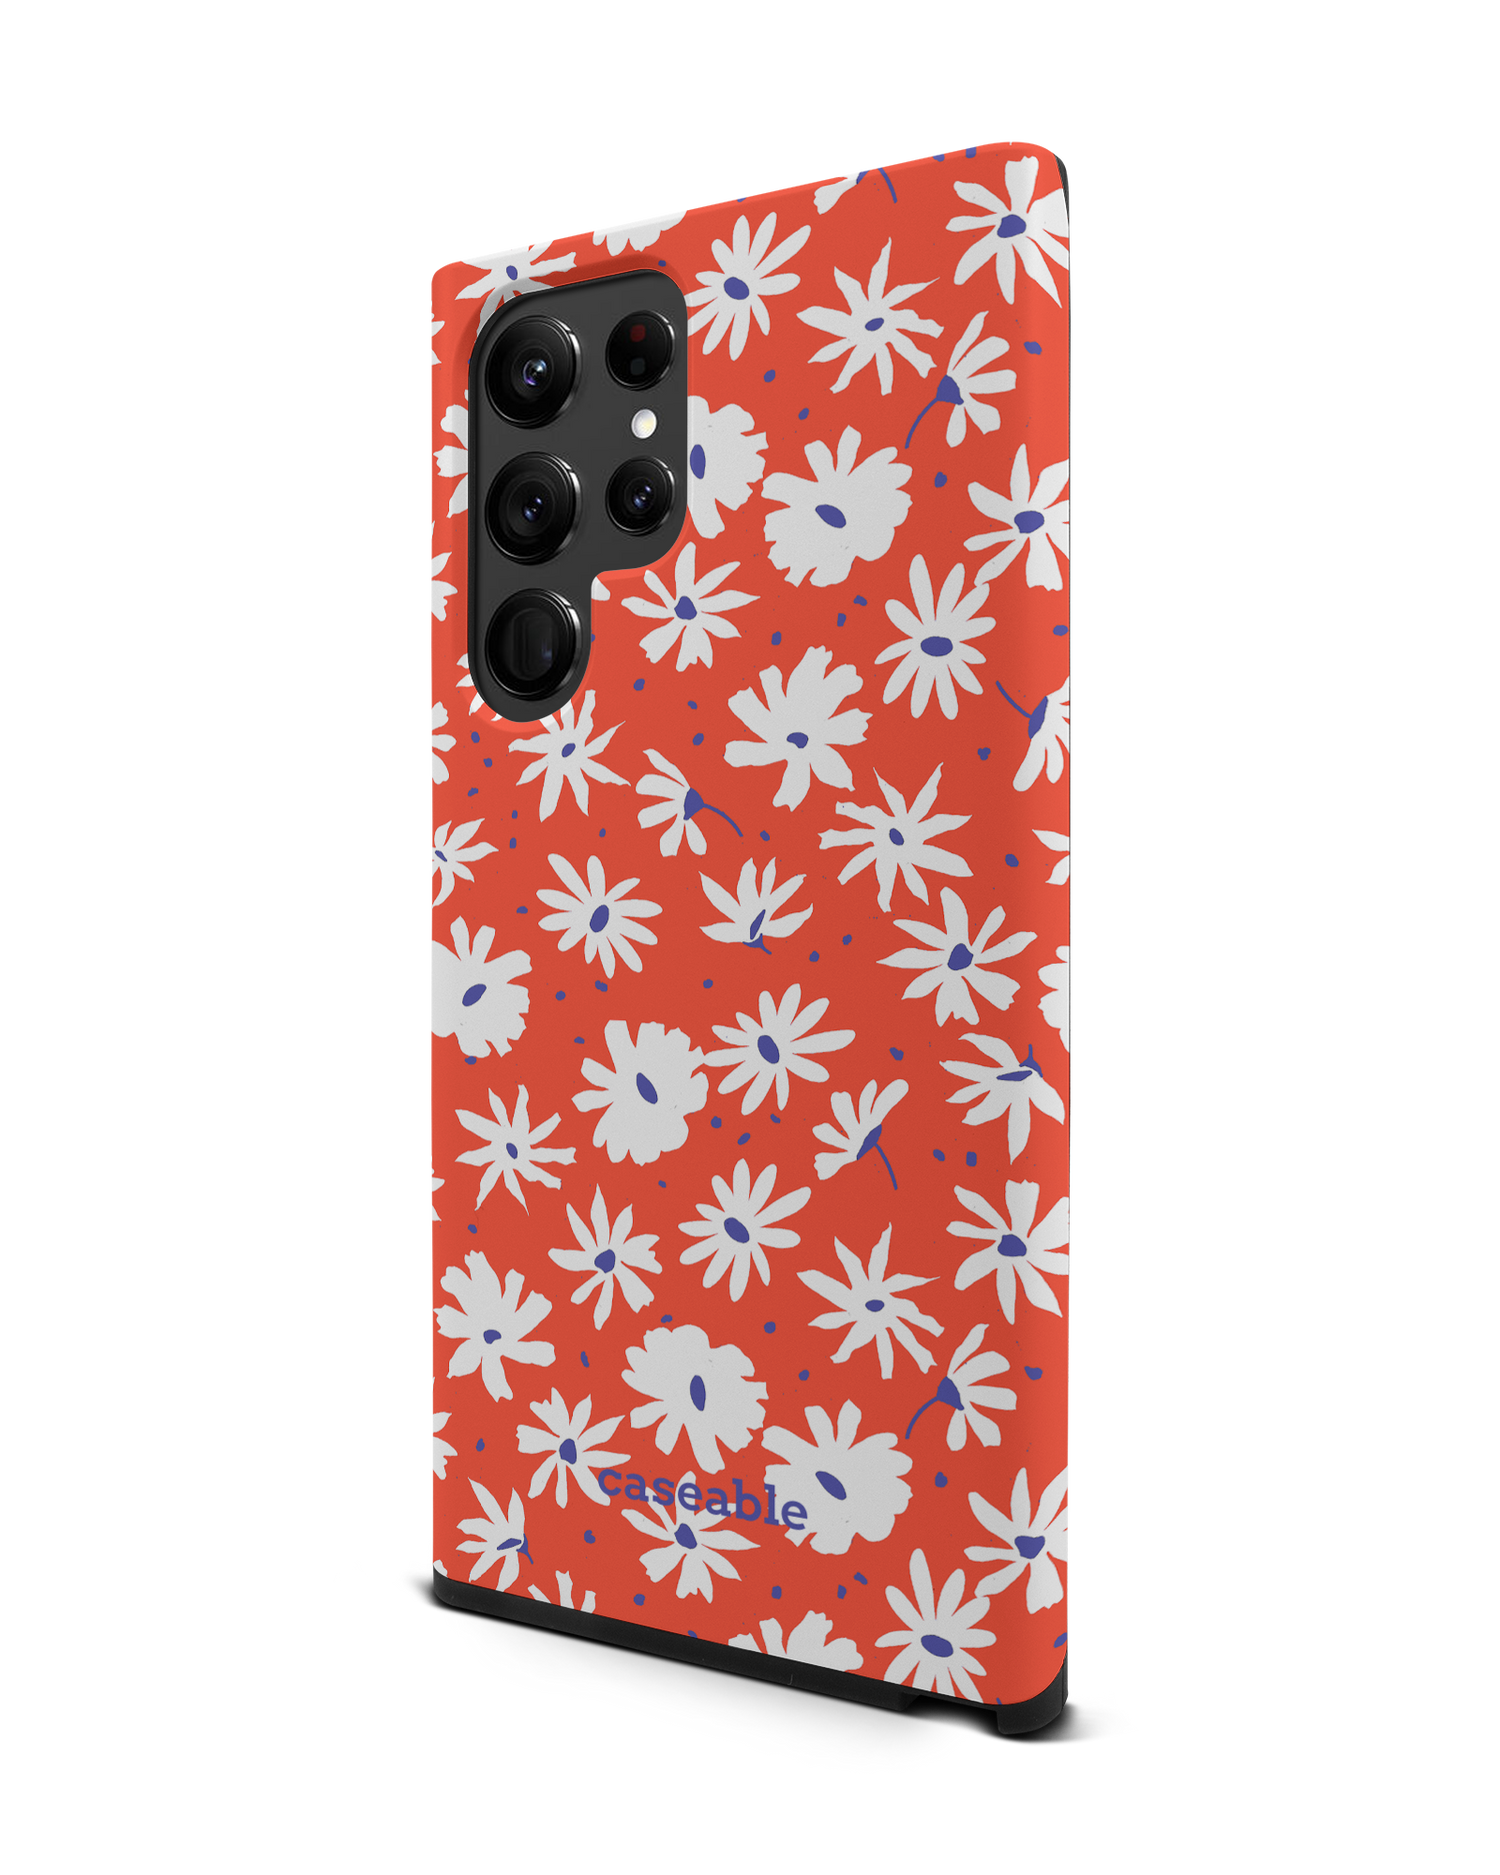 Retro Daisy Premium Phone Case Samsung Galaxy S22 Ultra 5G: View from the right side